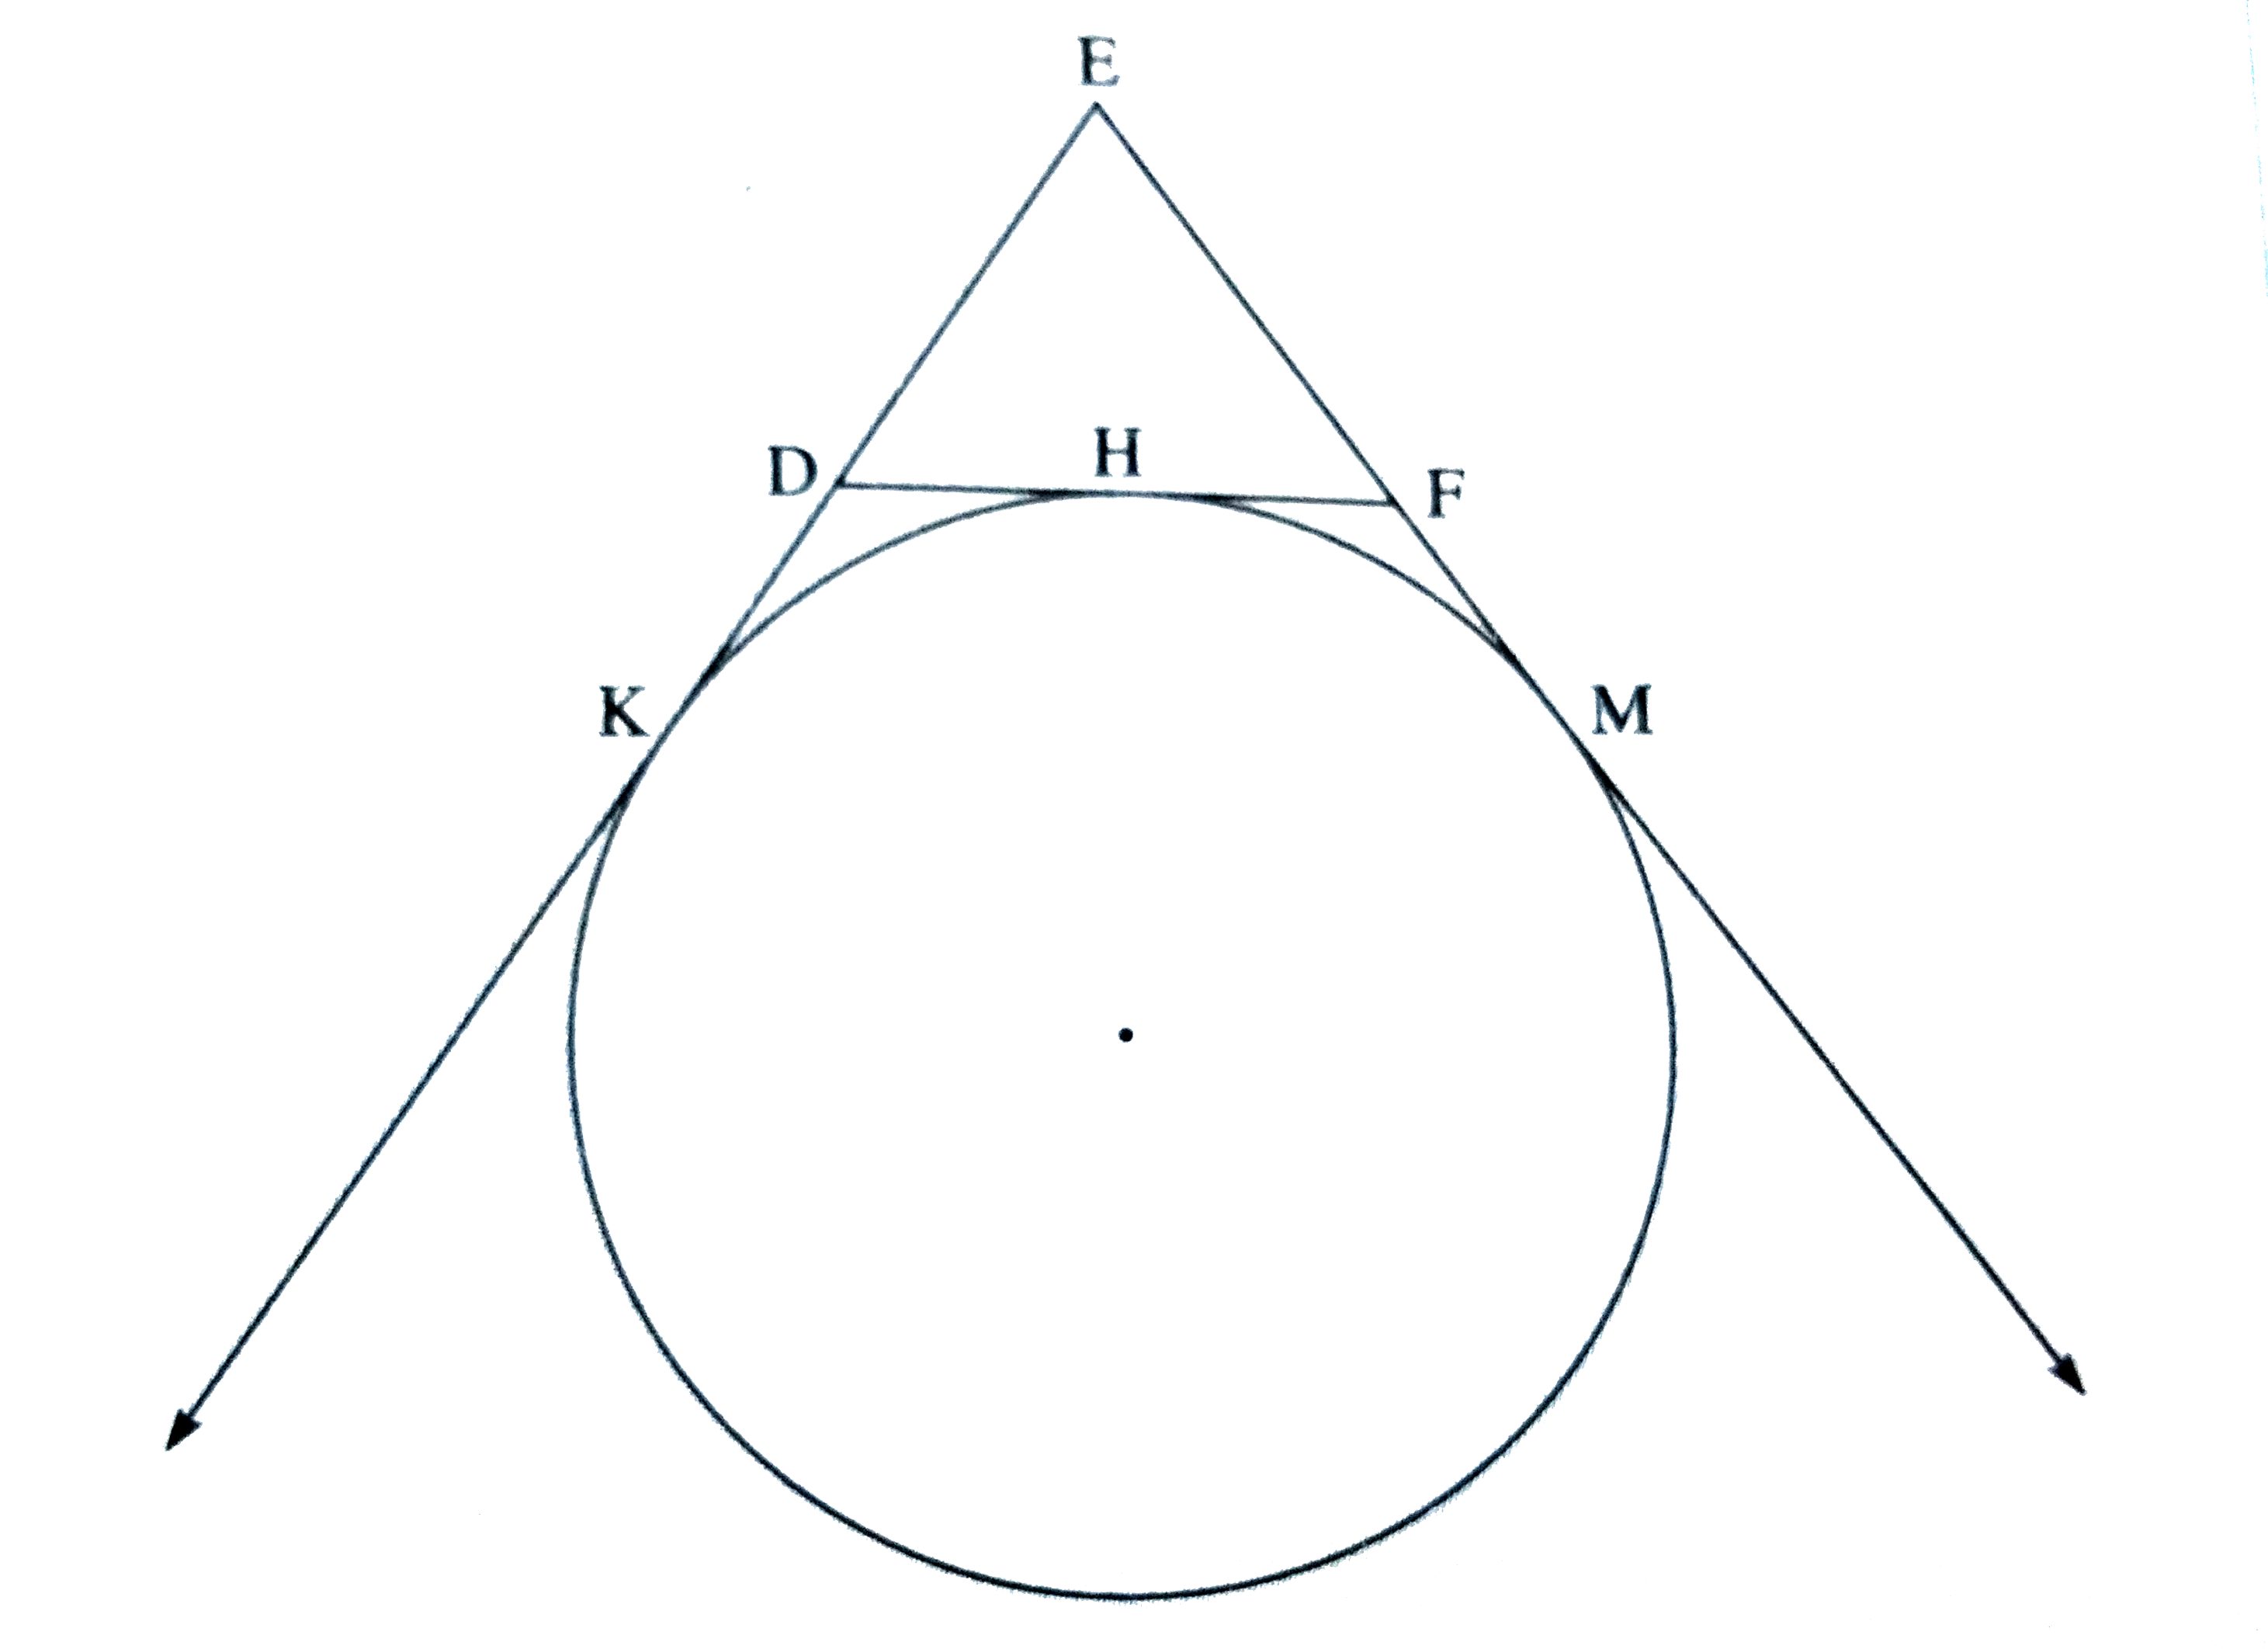 In the figure, a circle touches the side DF of triangle EDF at H and touches line ED and EF at points K and M respectively. If EK =9cm , then perimeter of triangle EDF is